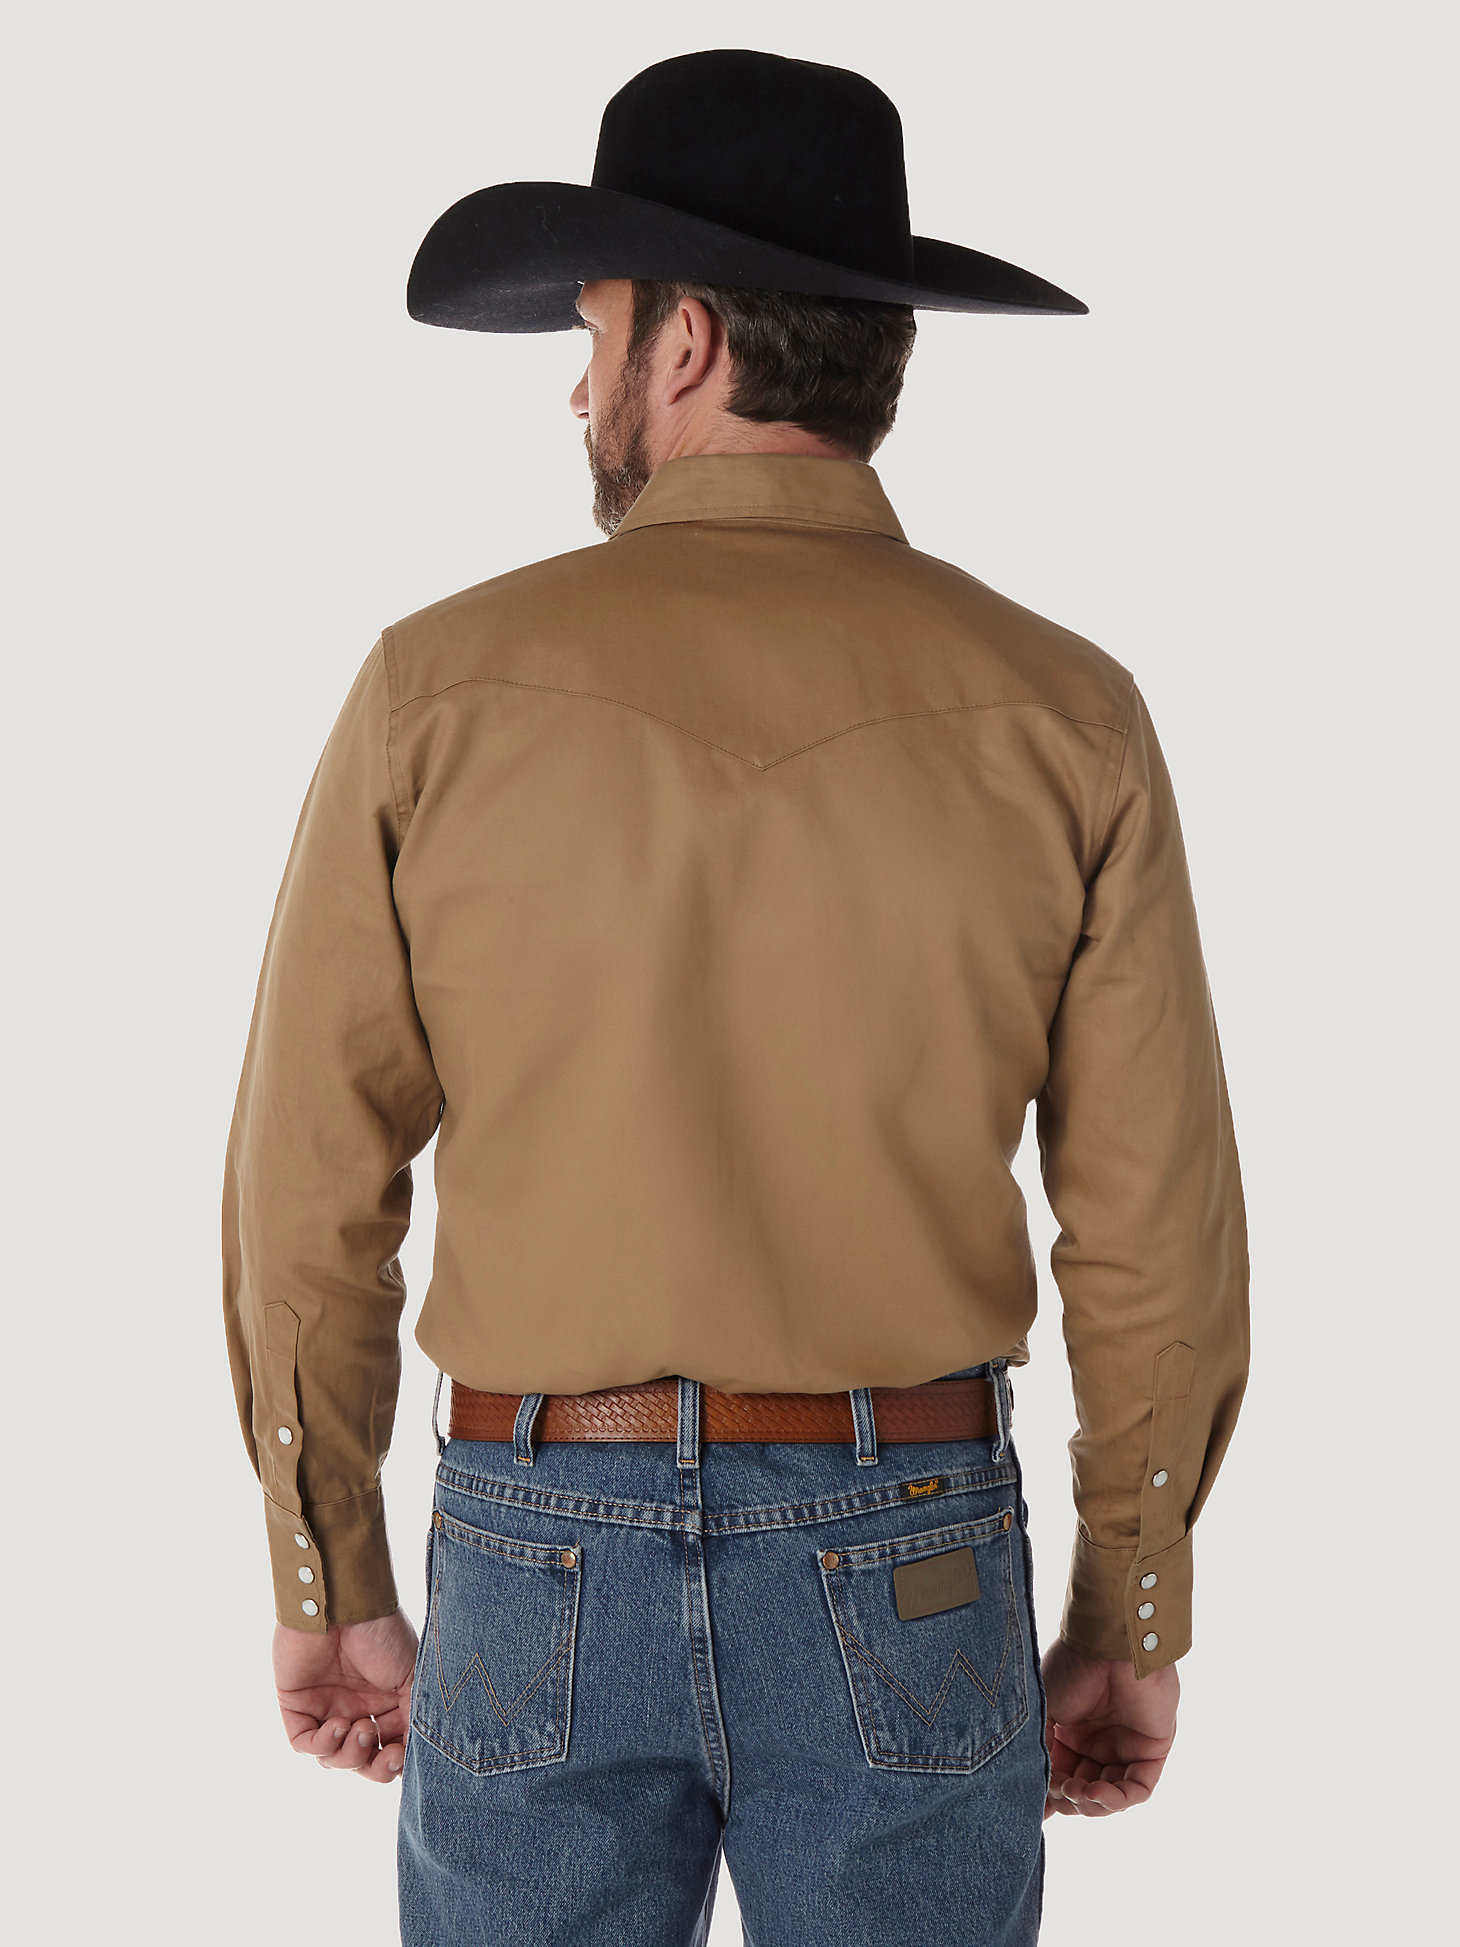 Cowboy Cut® Firm Finish Long Sleeve Western Snap Solid Work Shirt in Rawhide alternative view 3